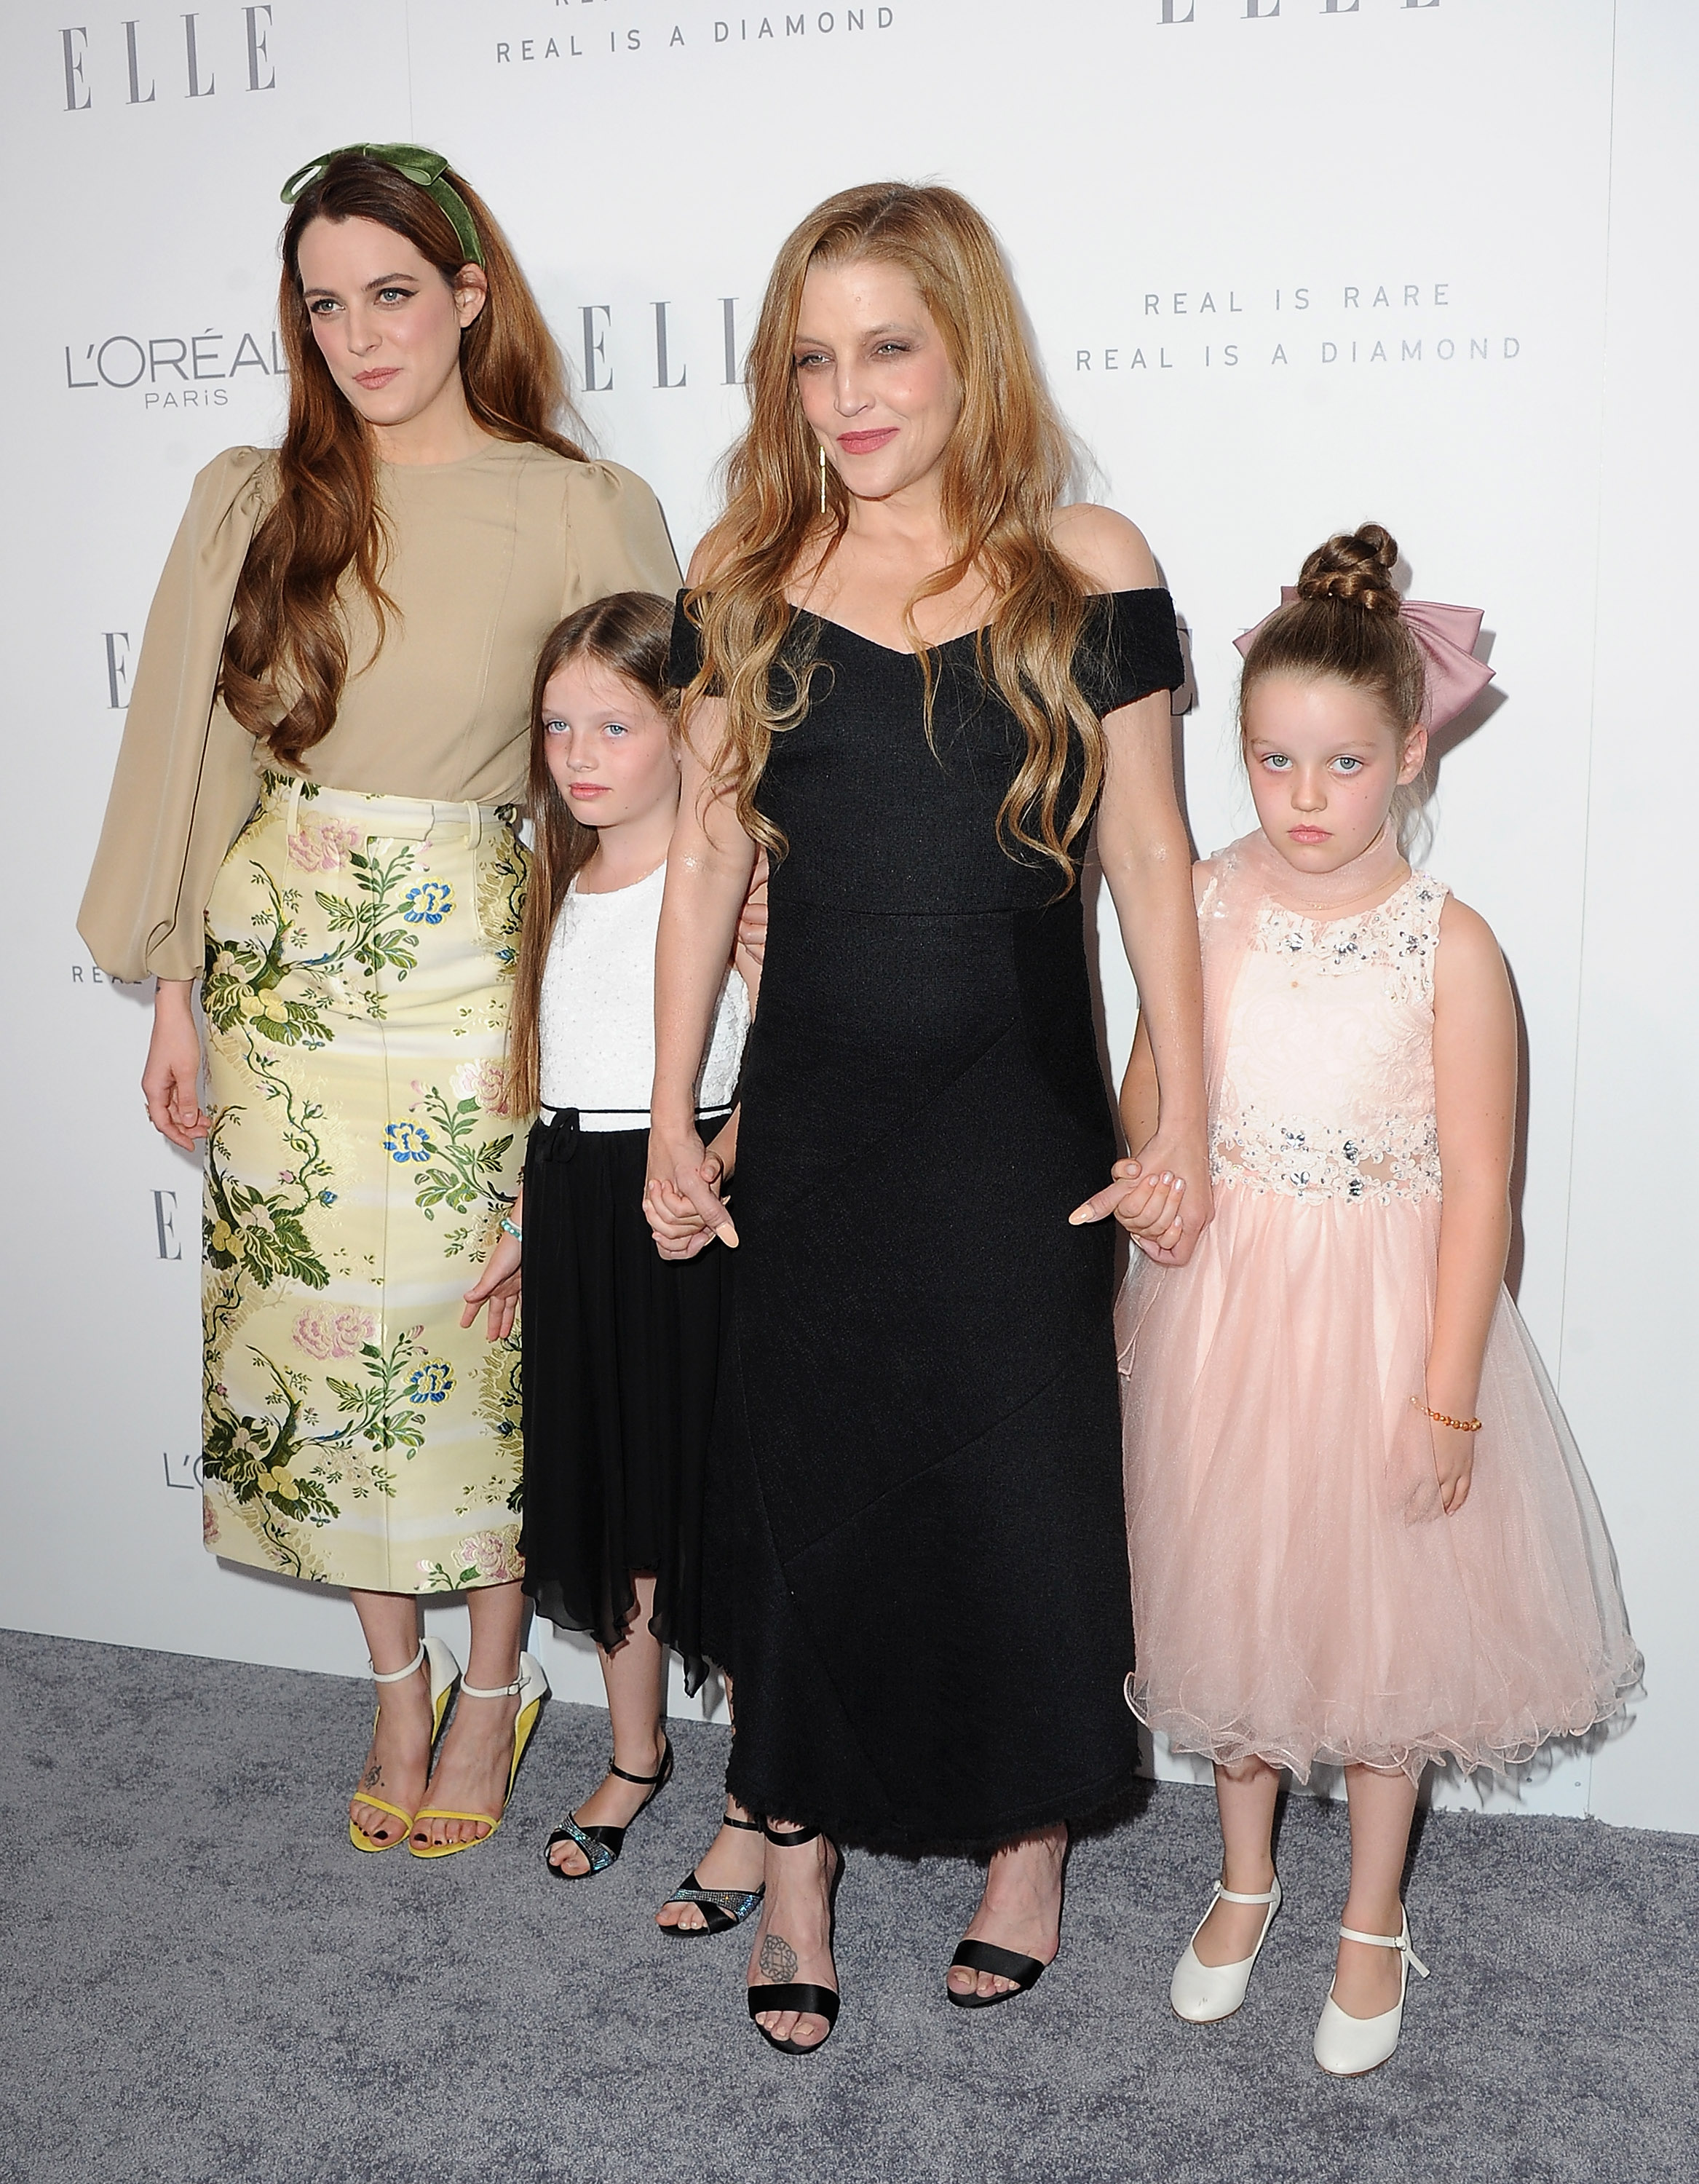 Riley Keough, Lisa Marie Presley, Harper Lockwood and Finely Lockwood arrive at ELLE's 24th Annual Women in Hollywood Celebration at Four Seasons Hotel Los Angeles at Beverly Hills on October 16, 2017 in Los Angeles, California. | Source: Getty Images